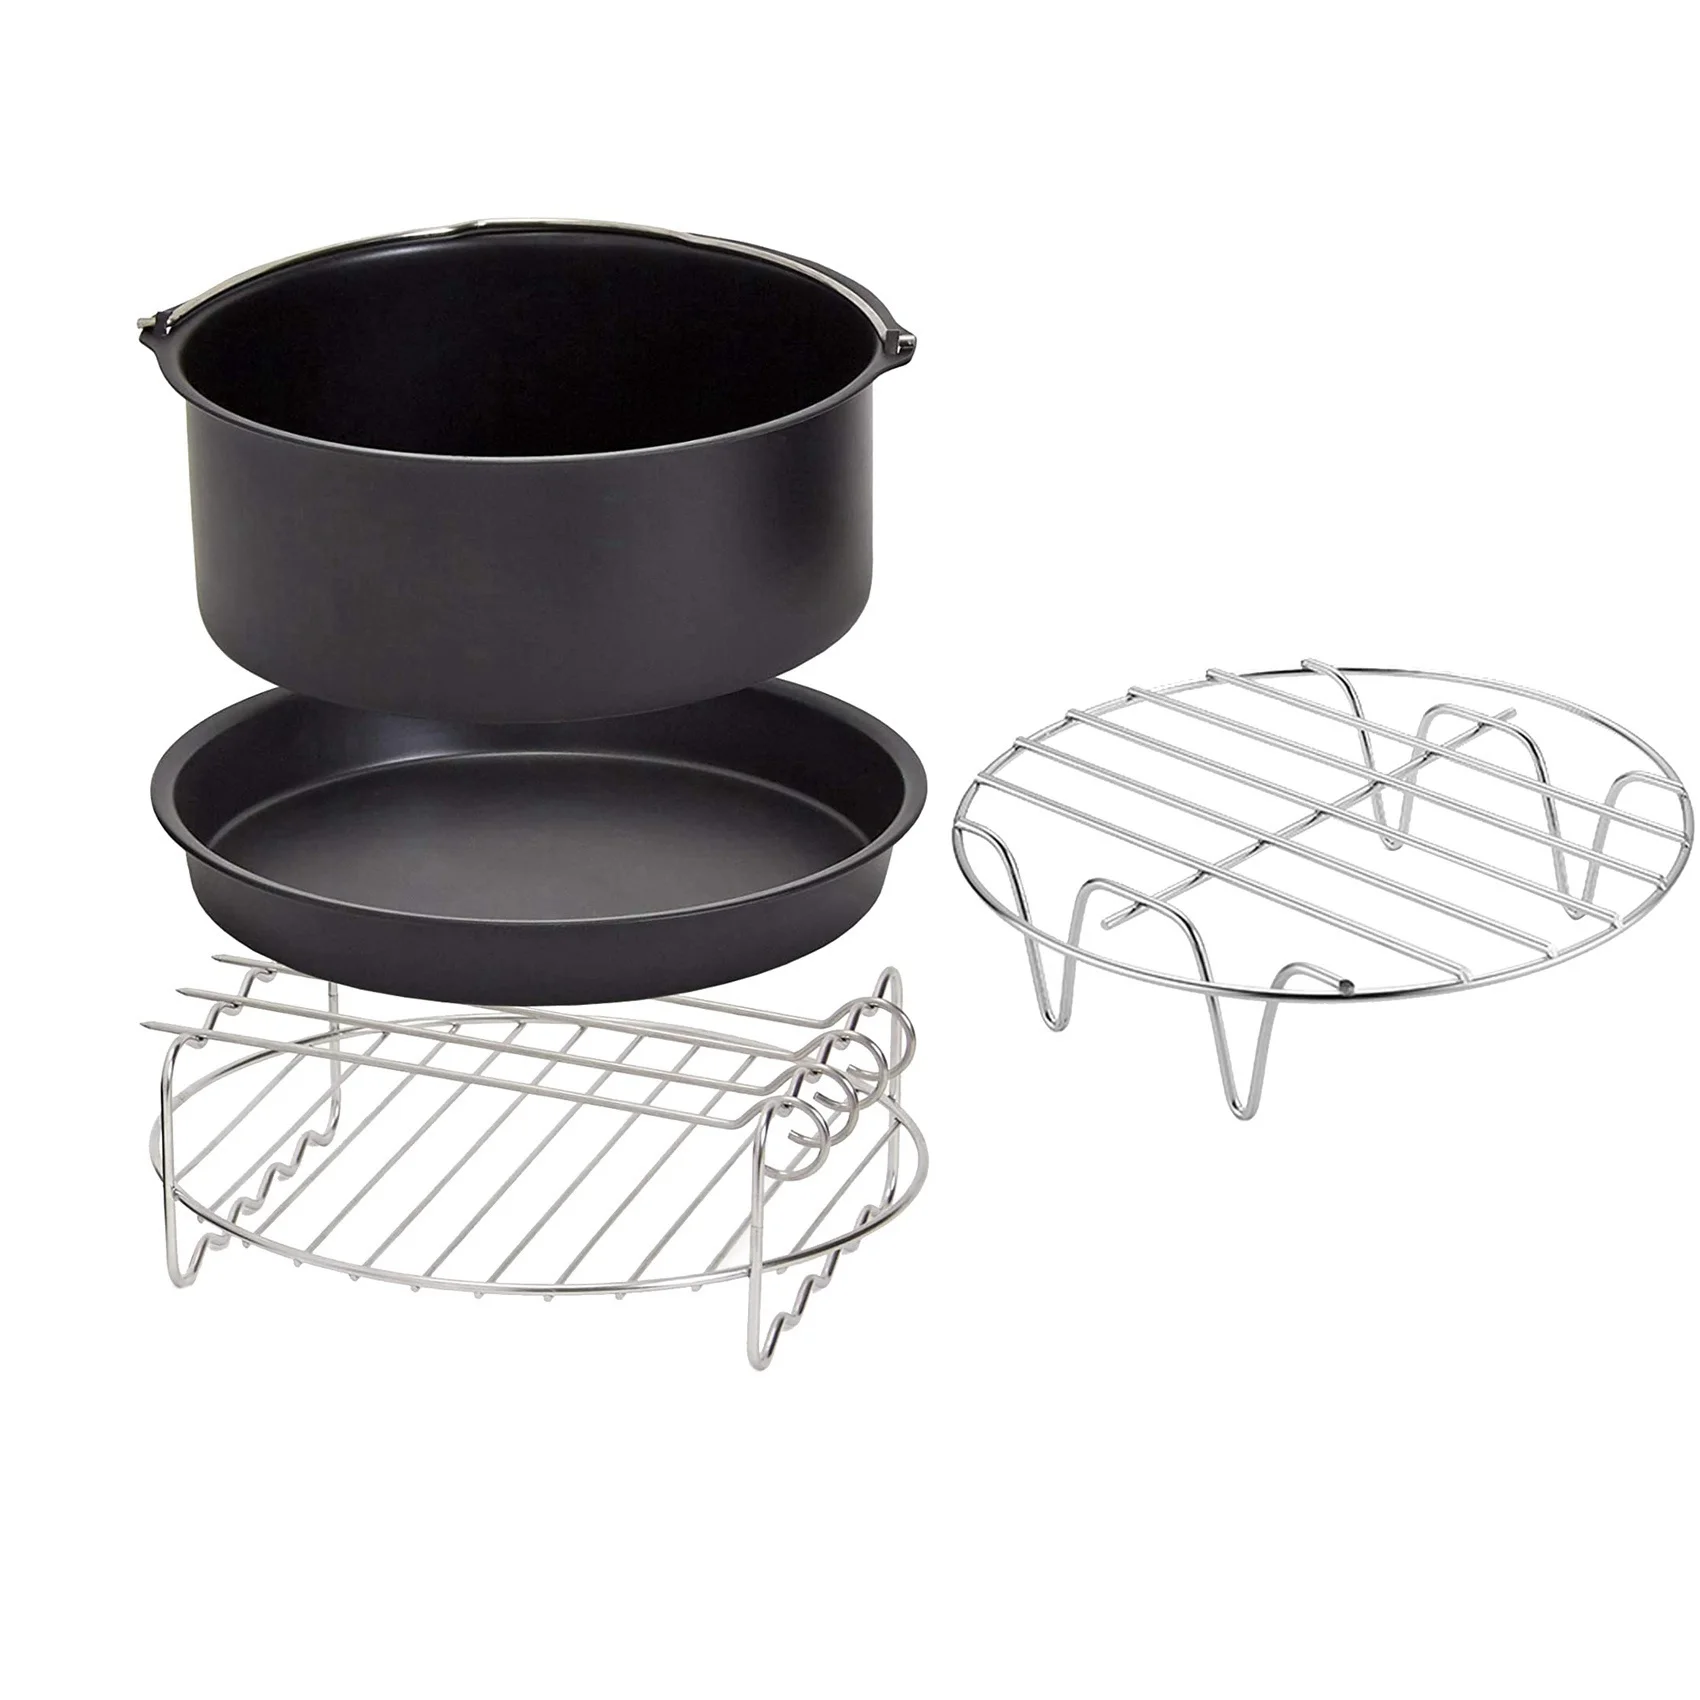 

4 Pcs Air Fryer Accessories 6 Inch Fit for Airfryer 2.3-3.2QT Baking Basket Pizza Plate Grill Pot Kitchen Cooking Tool